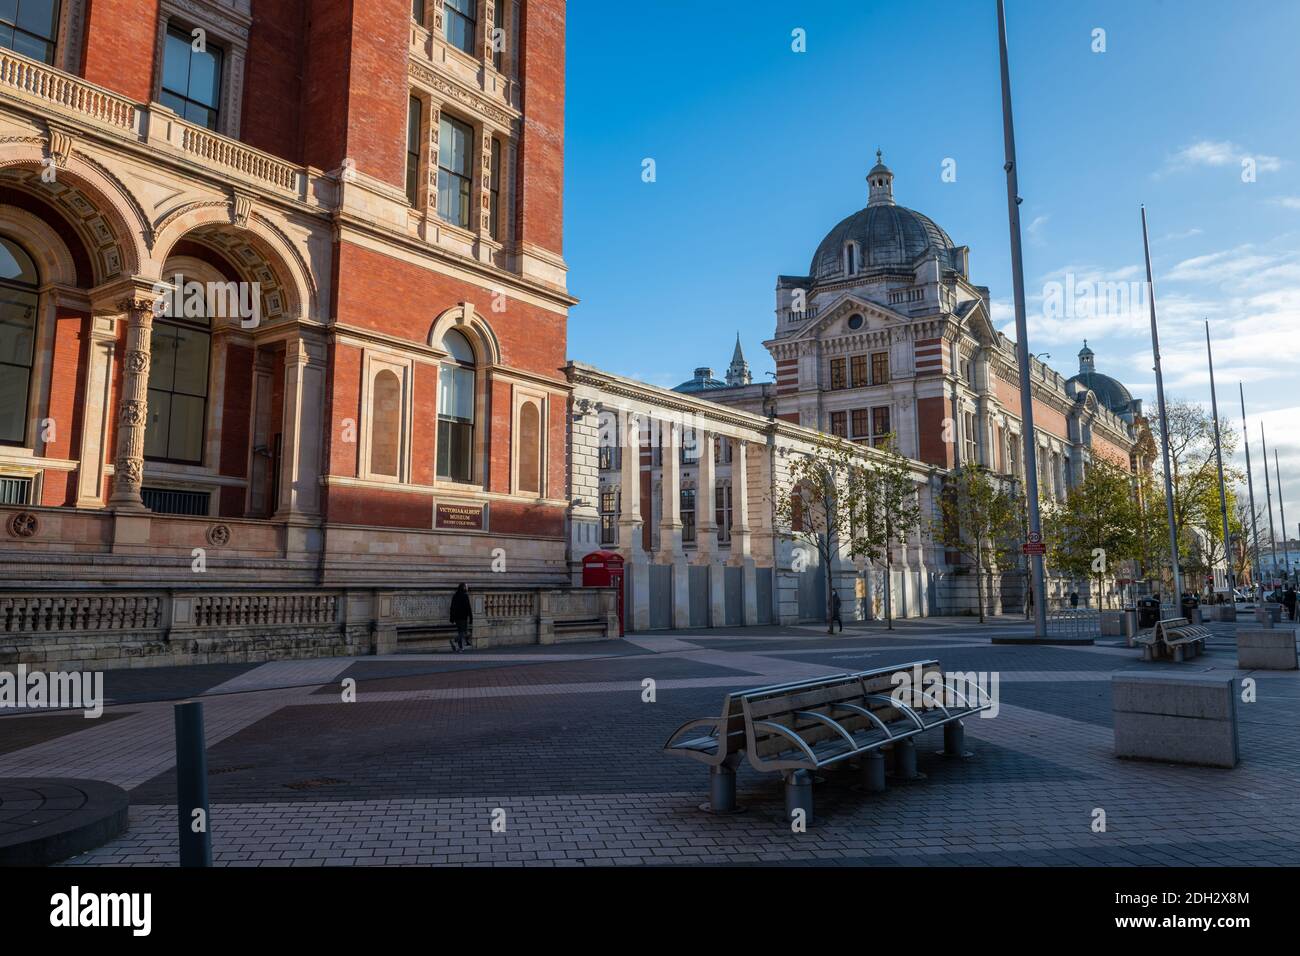 An exterior view of the Victoria and Albert Museum in London Knightsbridge. One of Britain's major historic institutions. Stock Photo